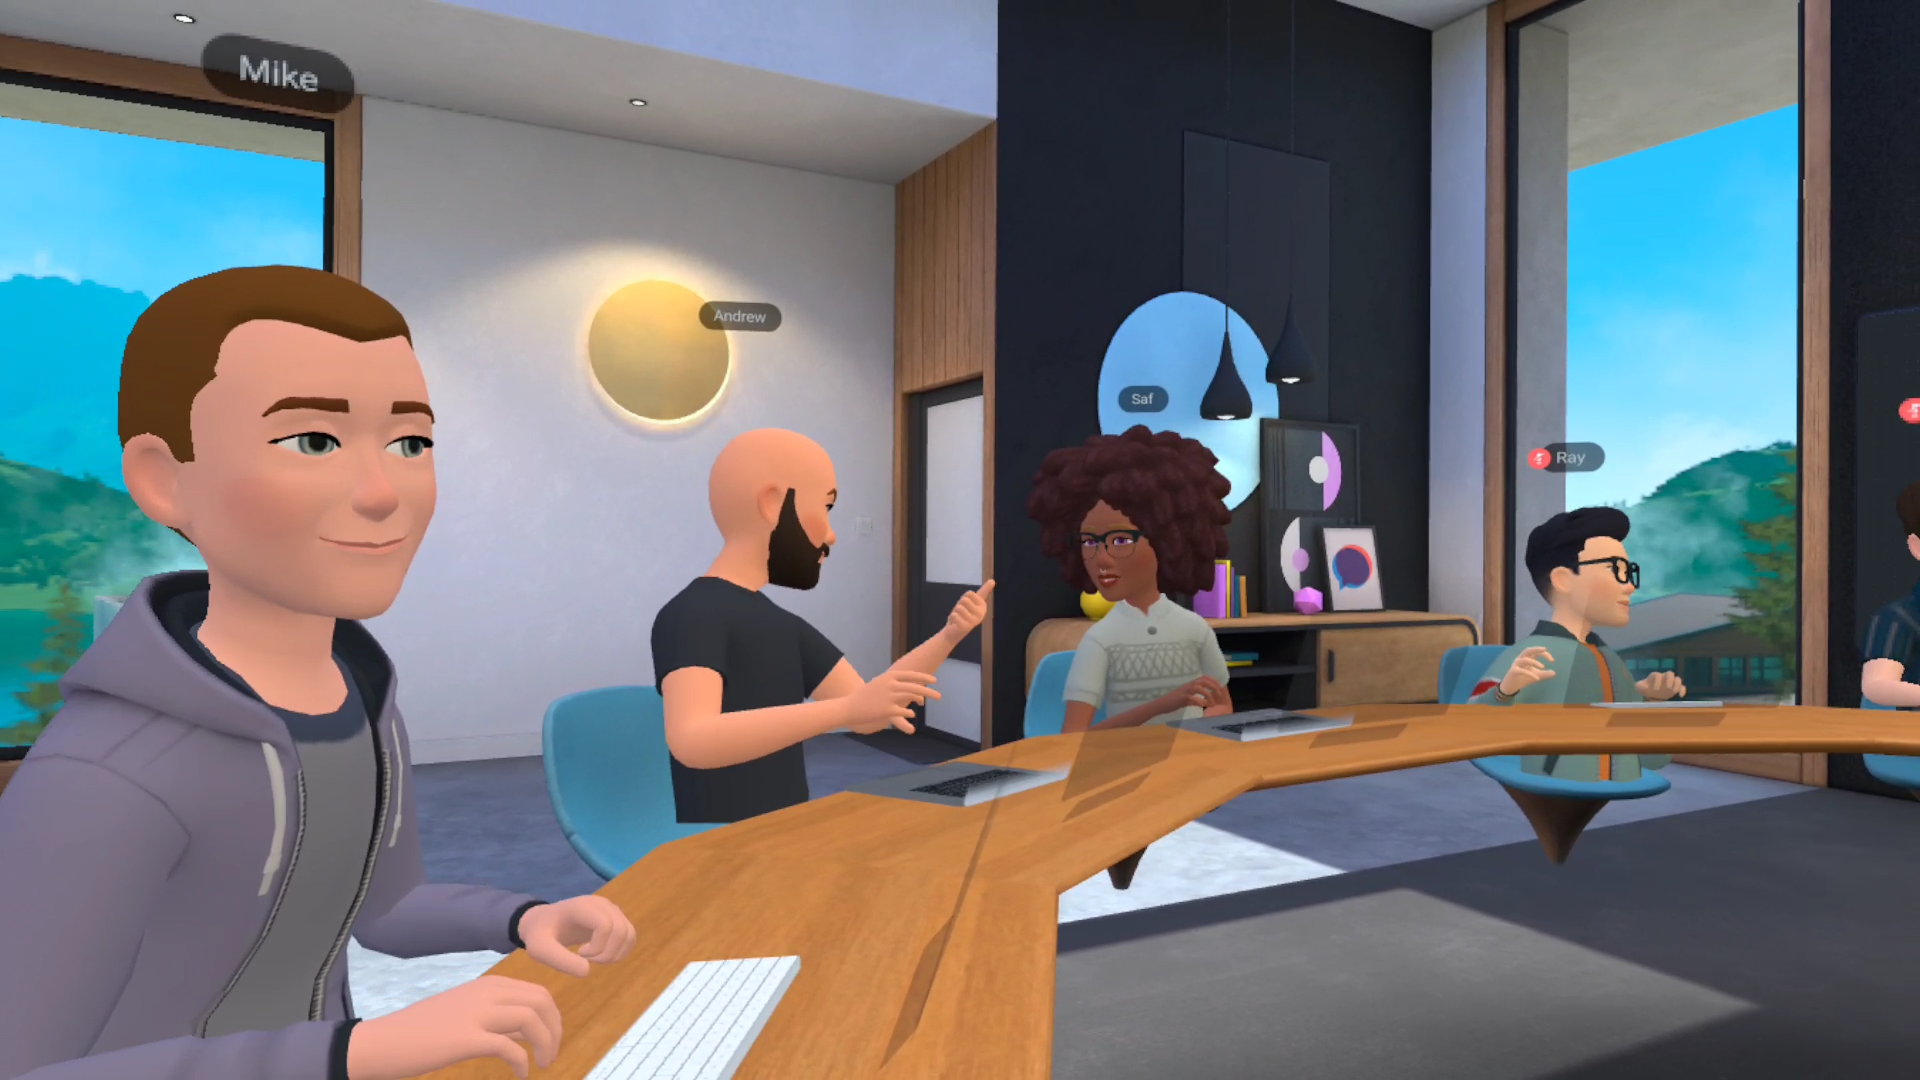 DELA DISCOUNT 72sdYSjSxwXpKUyiqDKhVJ 5 issues Meta faces with VR workplace adoption — is a metaverse-based workforce truly our future? DELA DISCOUNT  